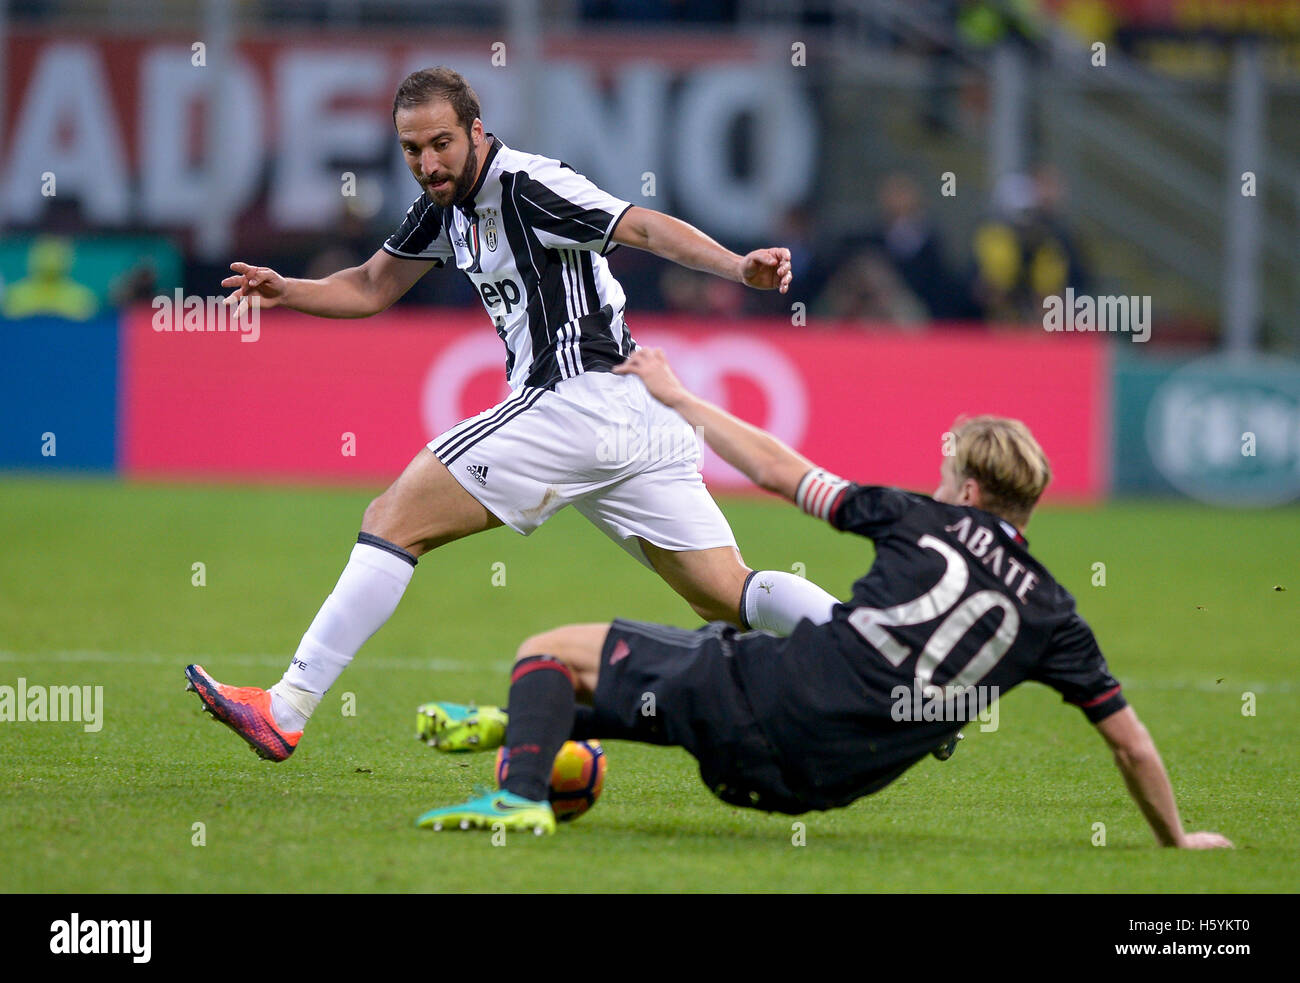 Giuseppe Meazza stadium, Milan, Italy. 22nd October, 2016:. Gonzalo Higuain of Juventus FC (left) and Ignazio Abate of AC MIlan compete for the ball during the Serie A football match between AC Milan and Juventus FC. Credit:  Nicolò Campo/Alamy Live News Stock Photo